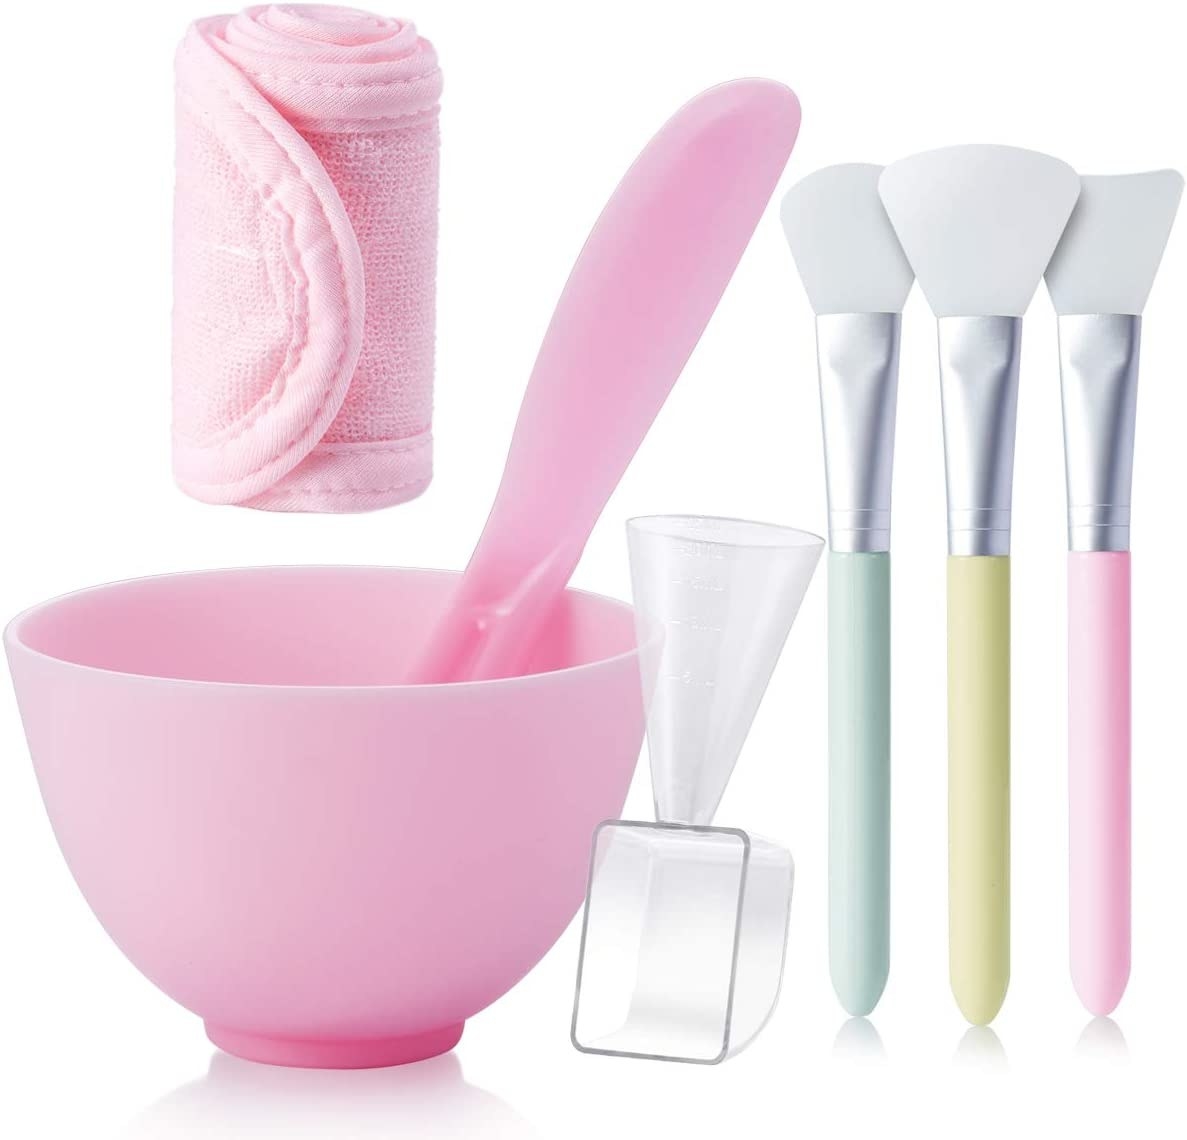 the whole bowl and spatula set in front of a plain backfround